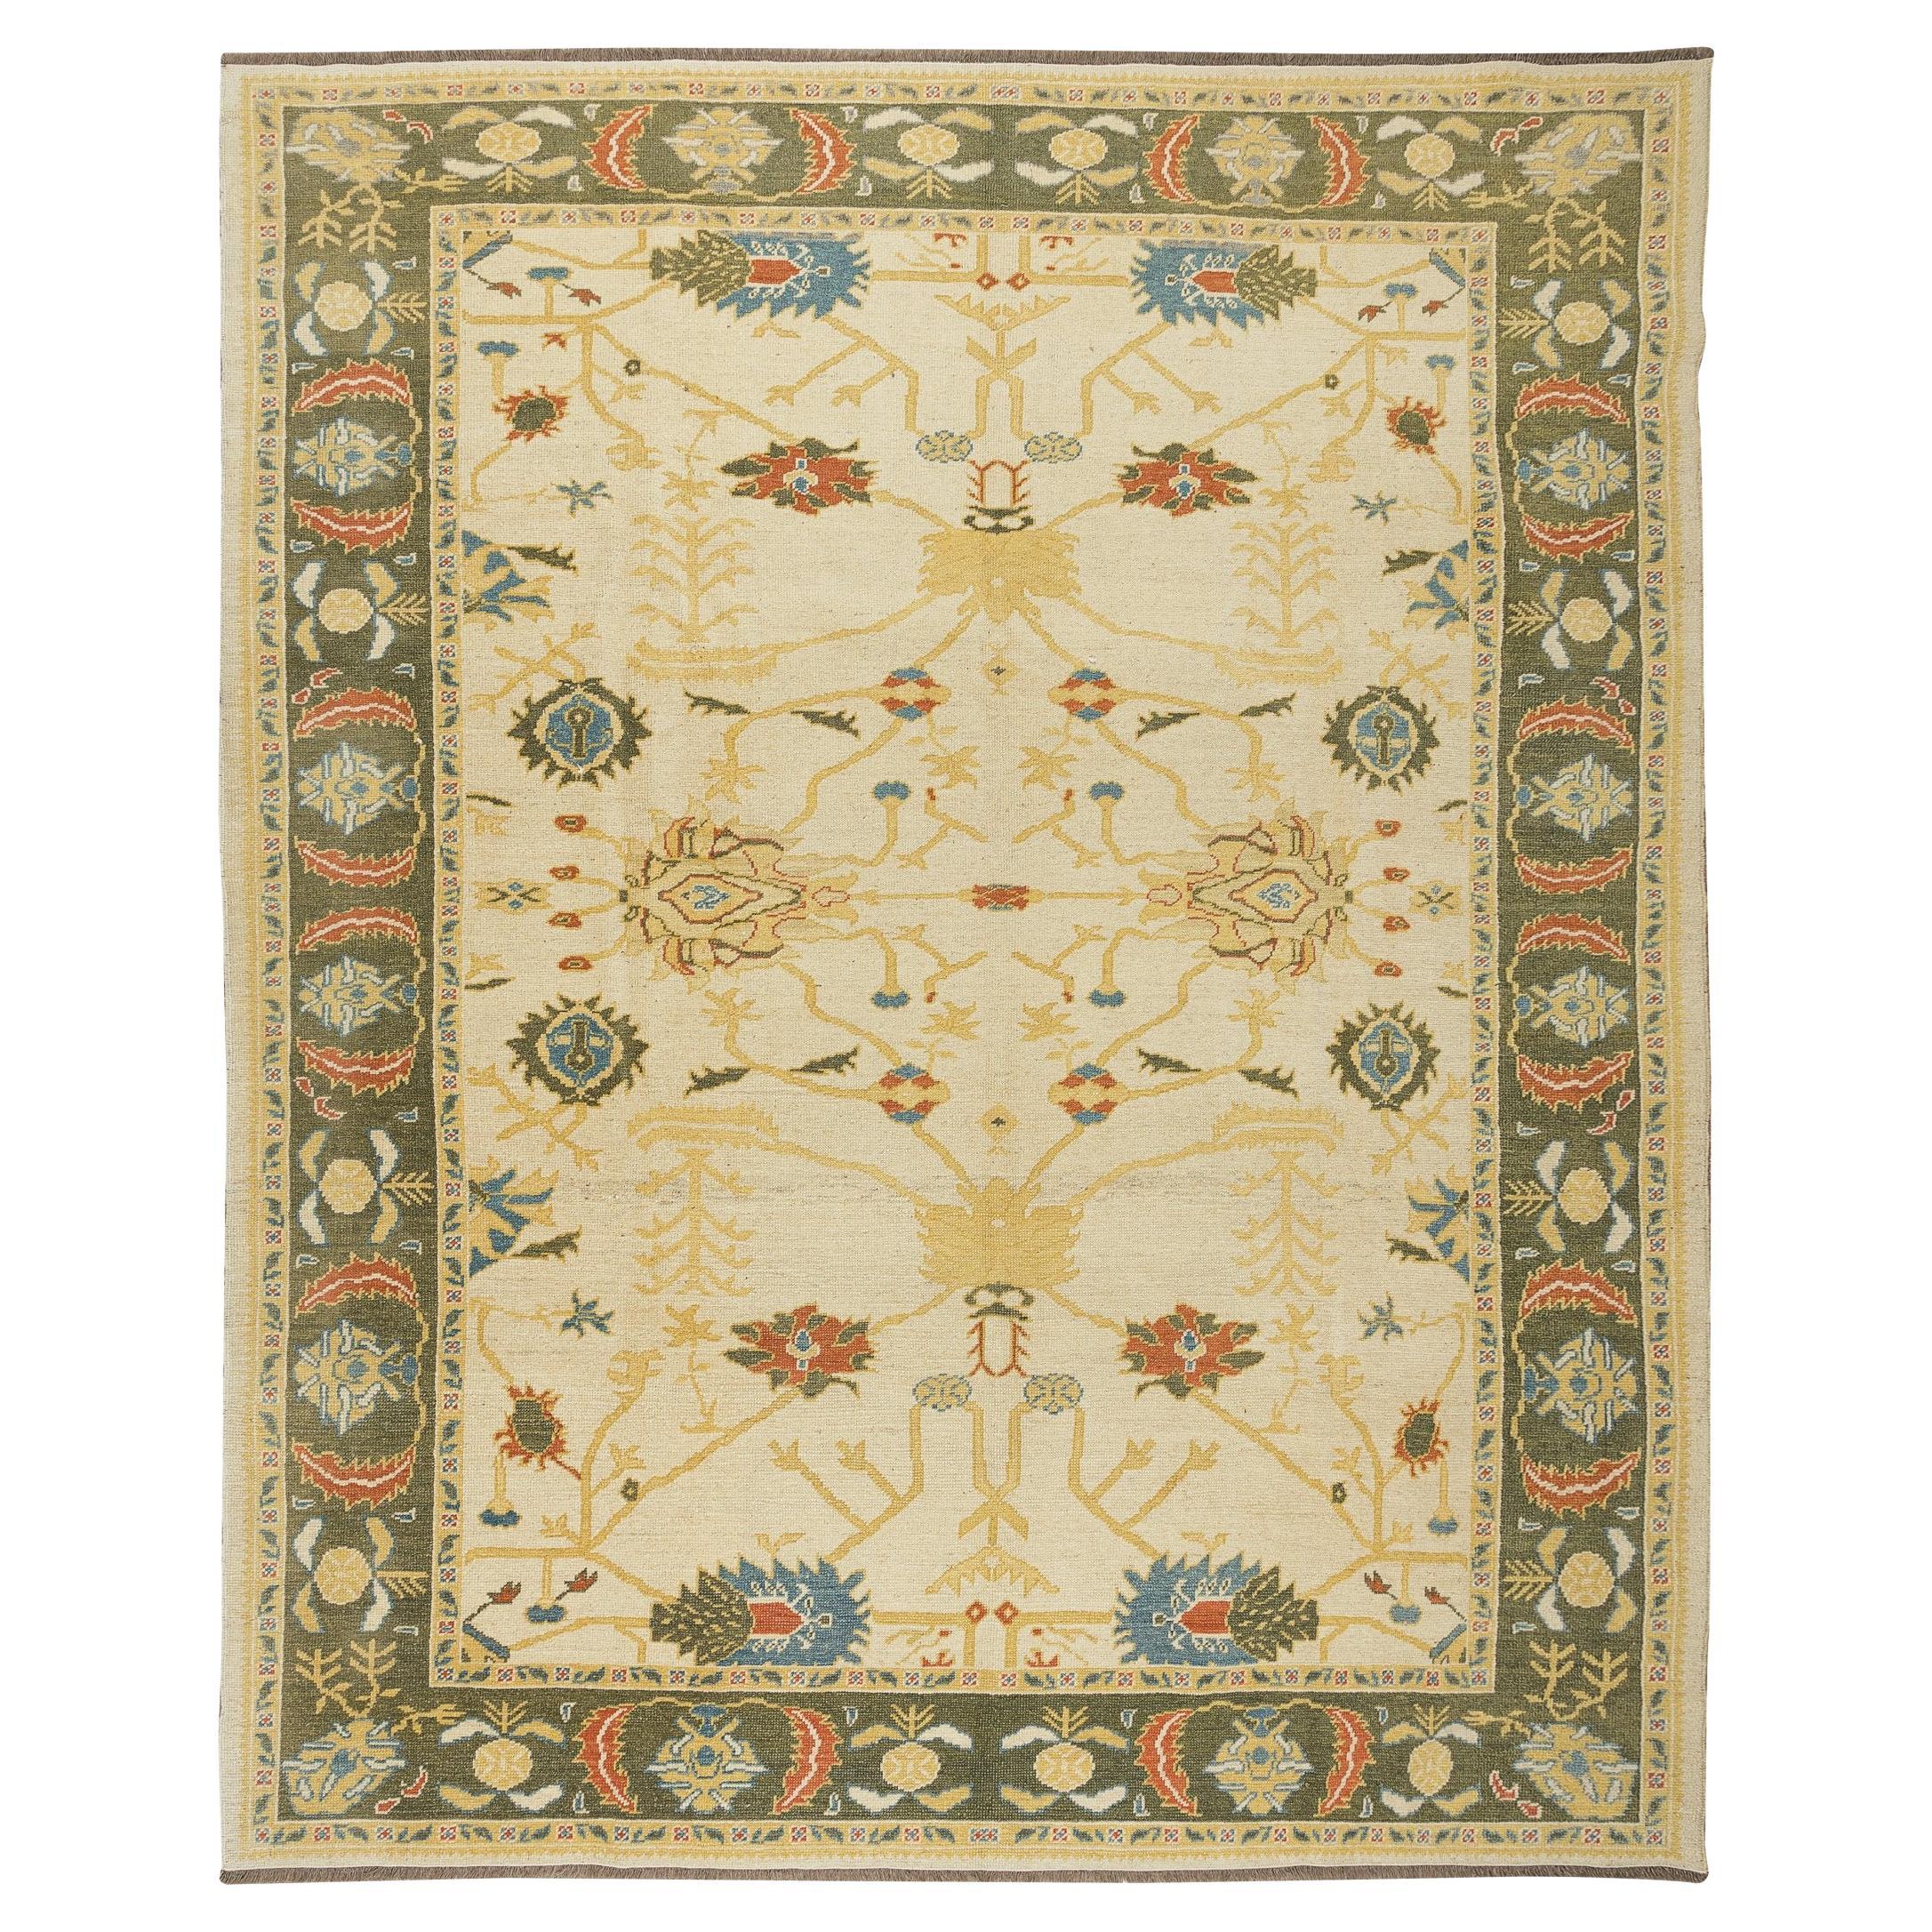 8.2x10 Ft Modern Hand Knotted Area Rug, Contemporary Turkish Carpet, 100% Wolle im Angebot